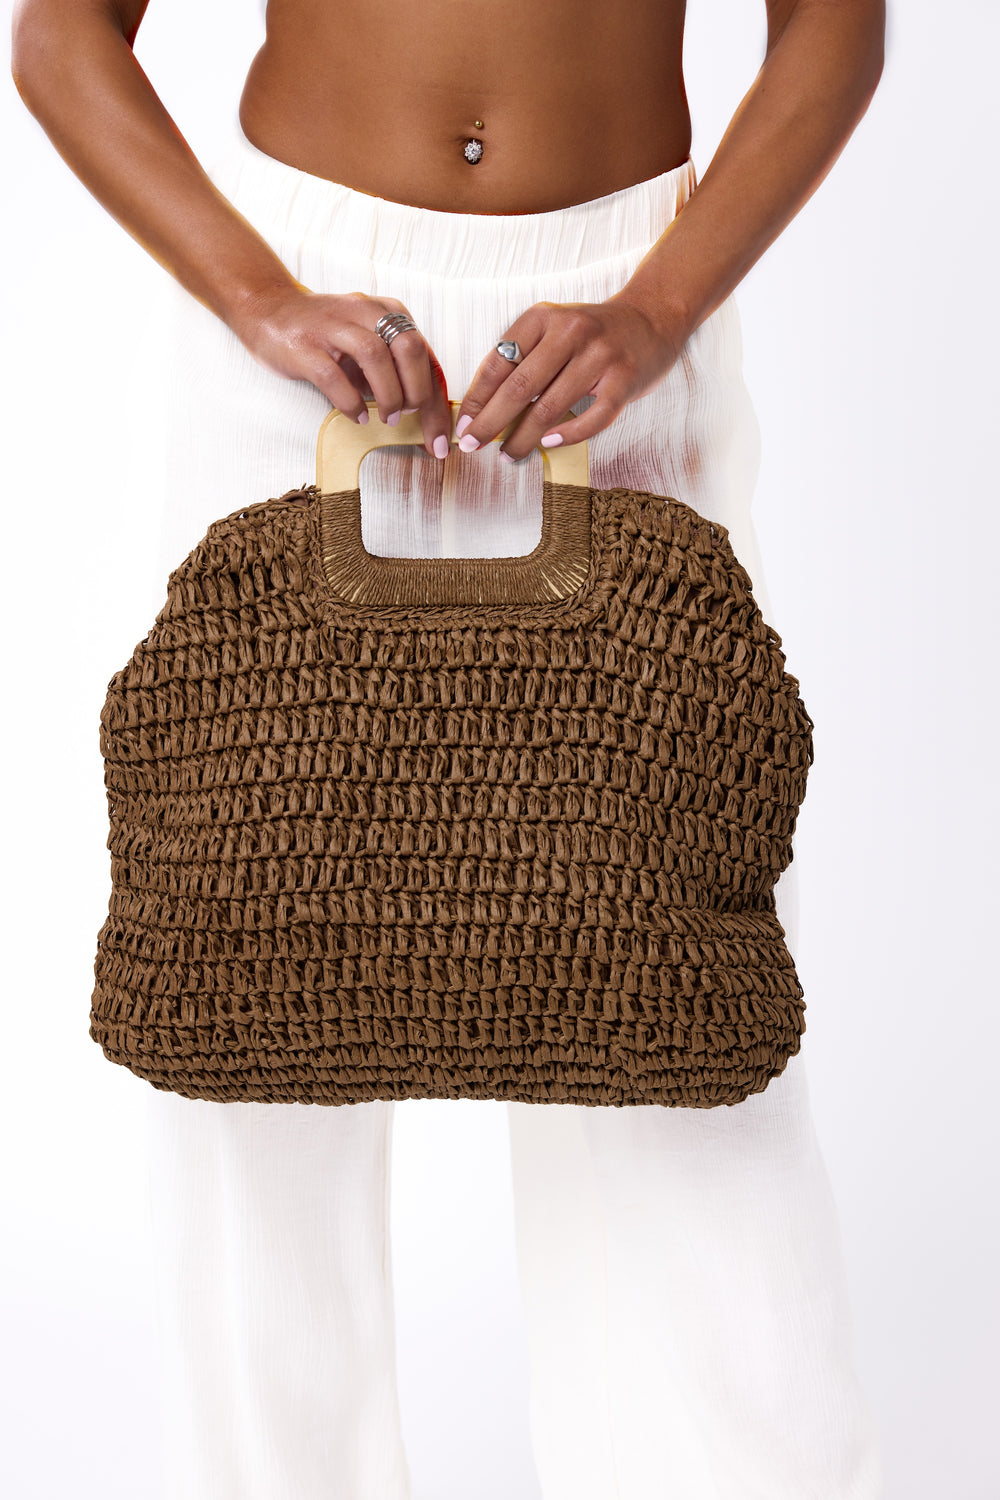 Melie Bianco Brown Eco-Friendly Straw Wooden Handle Tote Bag